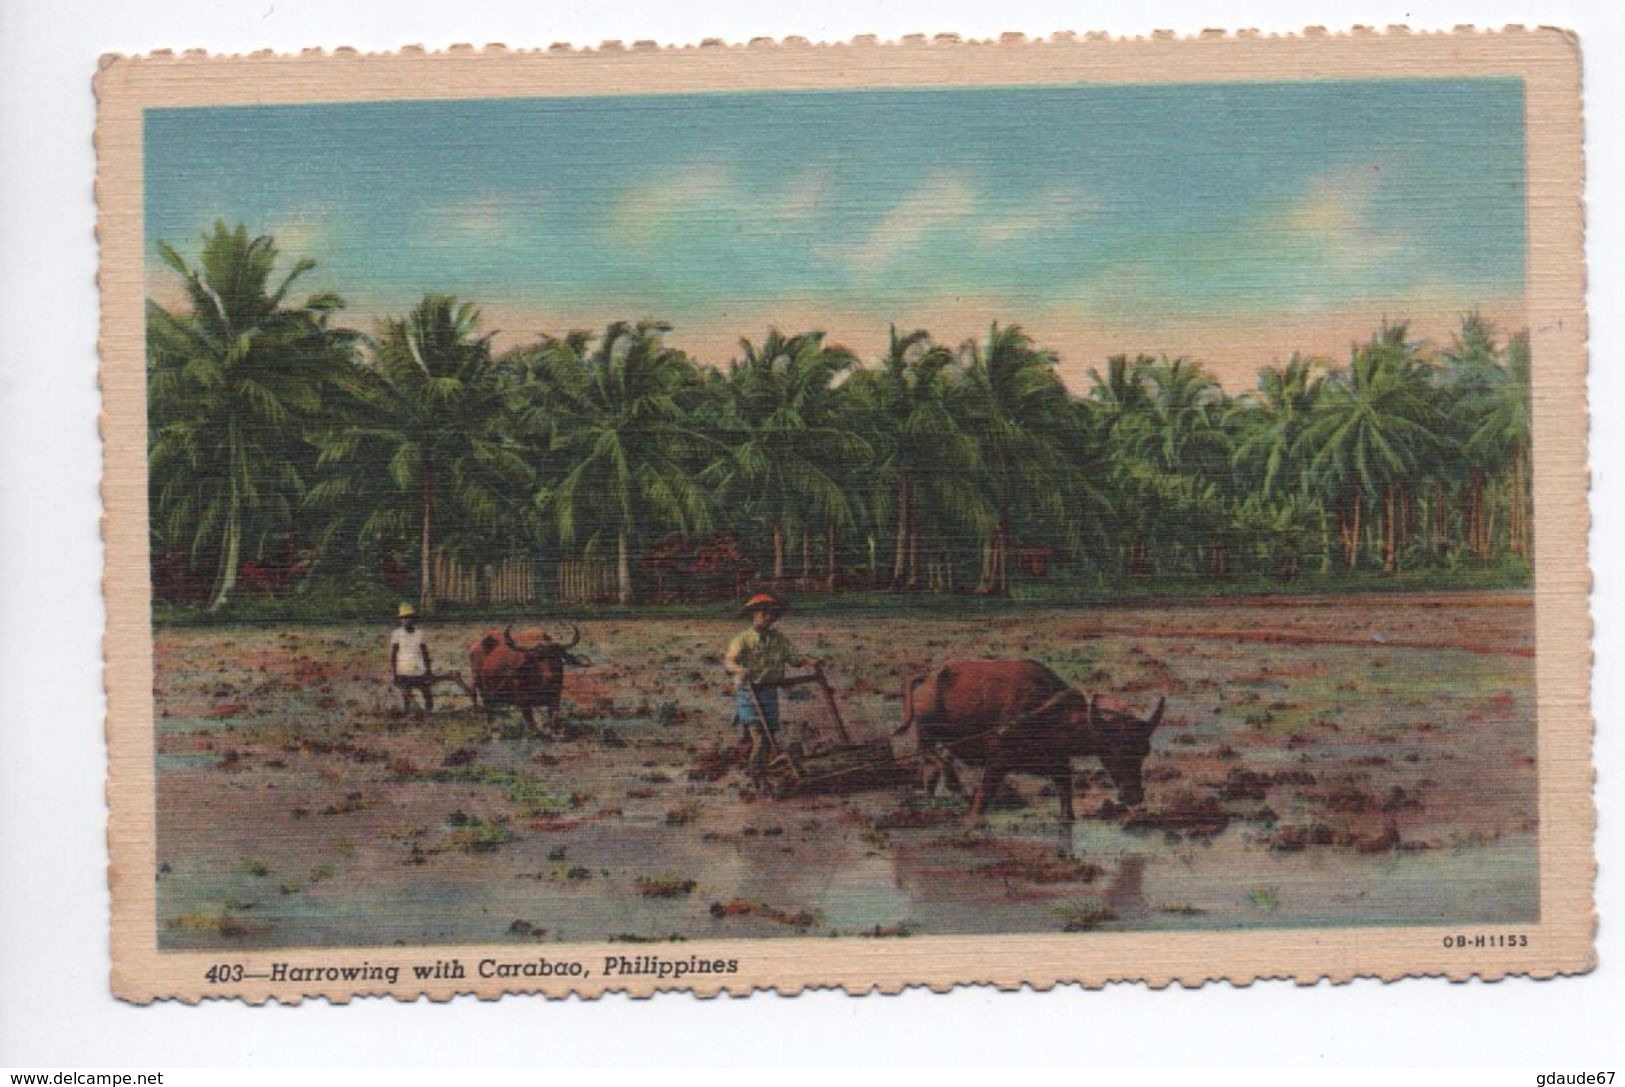 PHILIPPINES - HARROWING WITH CARABAO - AGRICULTURE - Philippinen